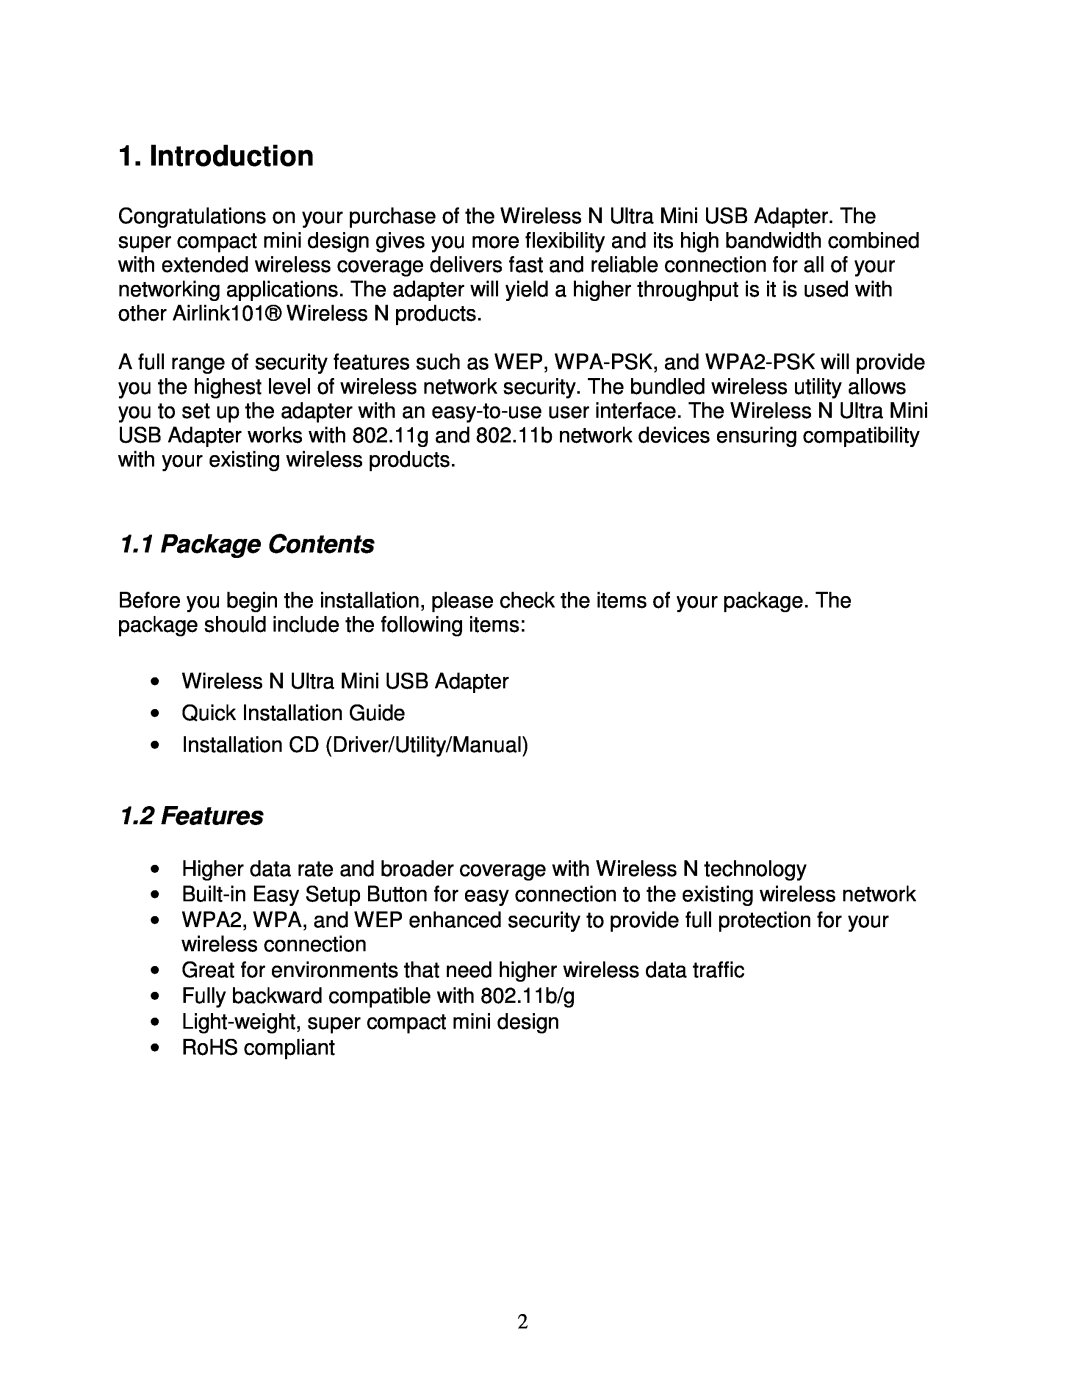 Airlink101 AWLL5088 user manual Introduction, Package Contents, Features 